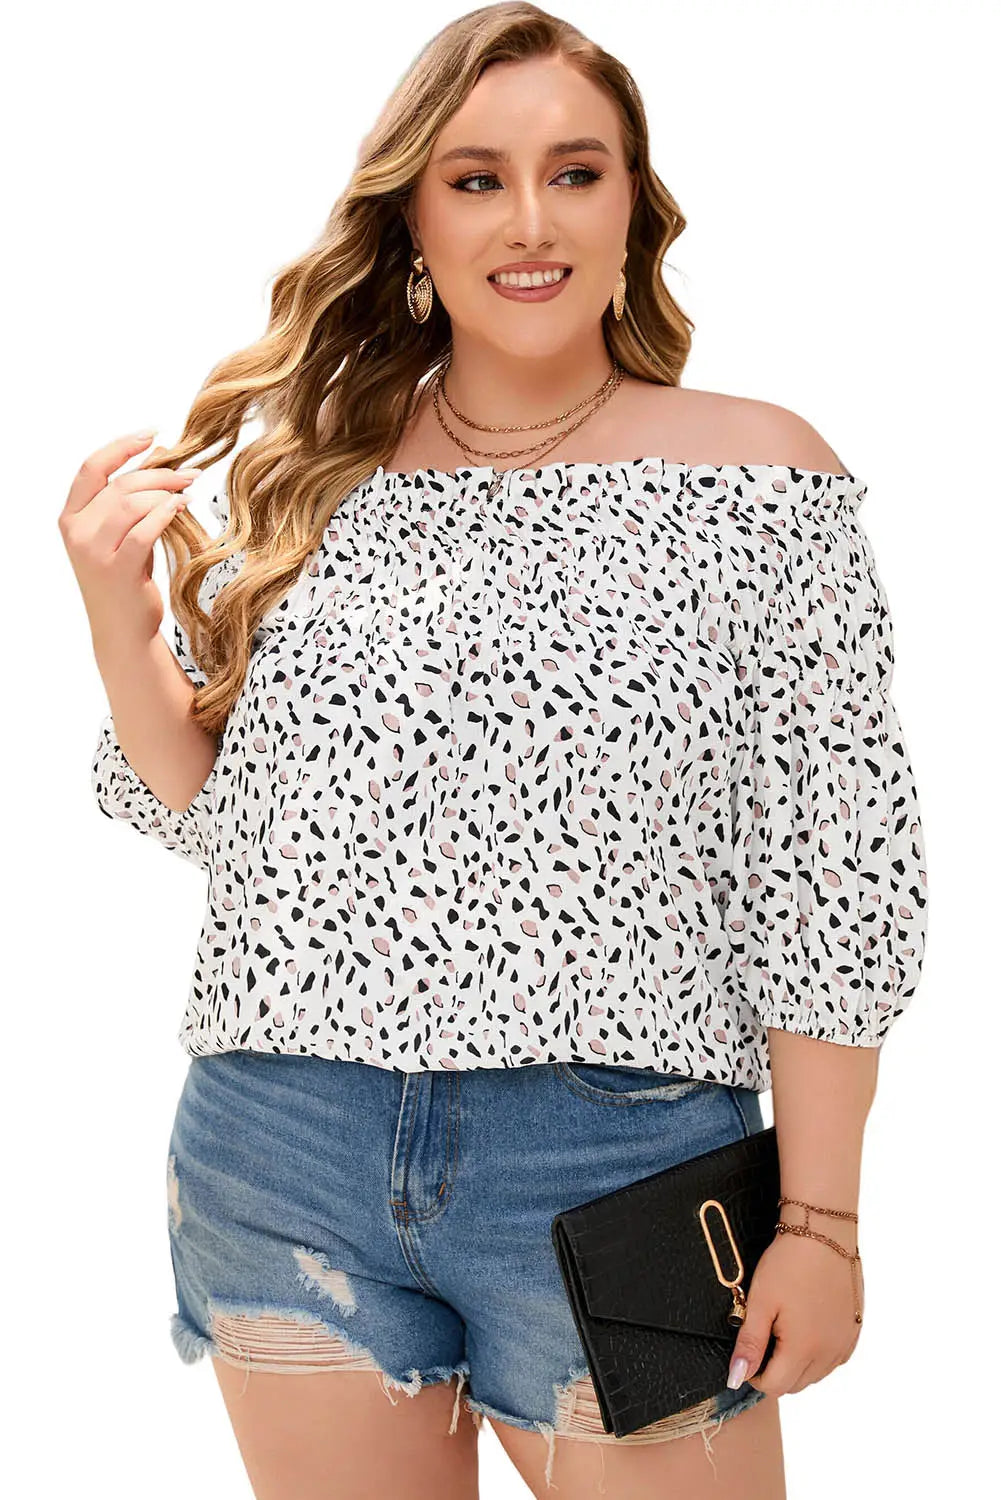 Cheetah spotted plus size off shoulder blouse